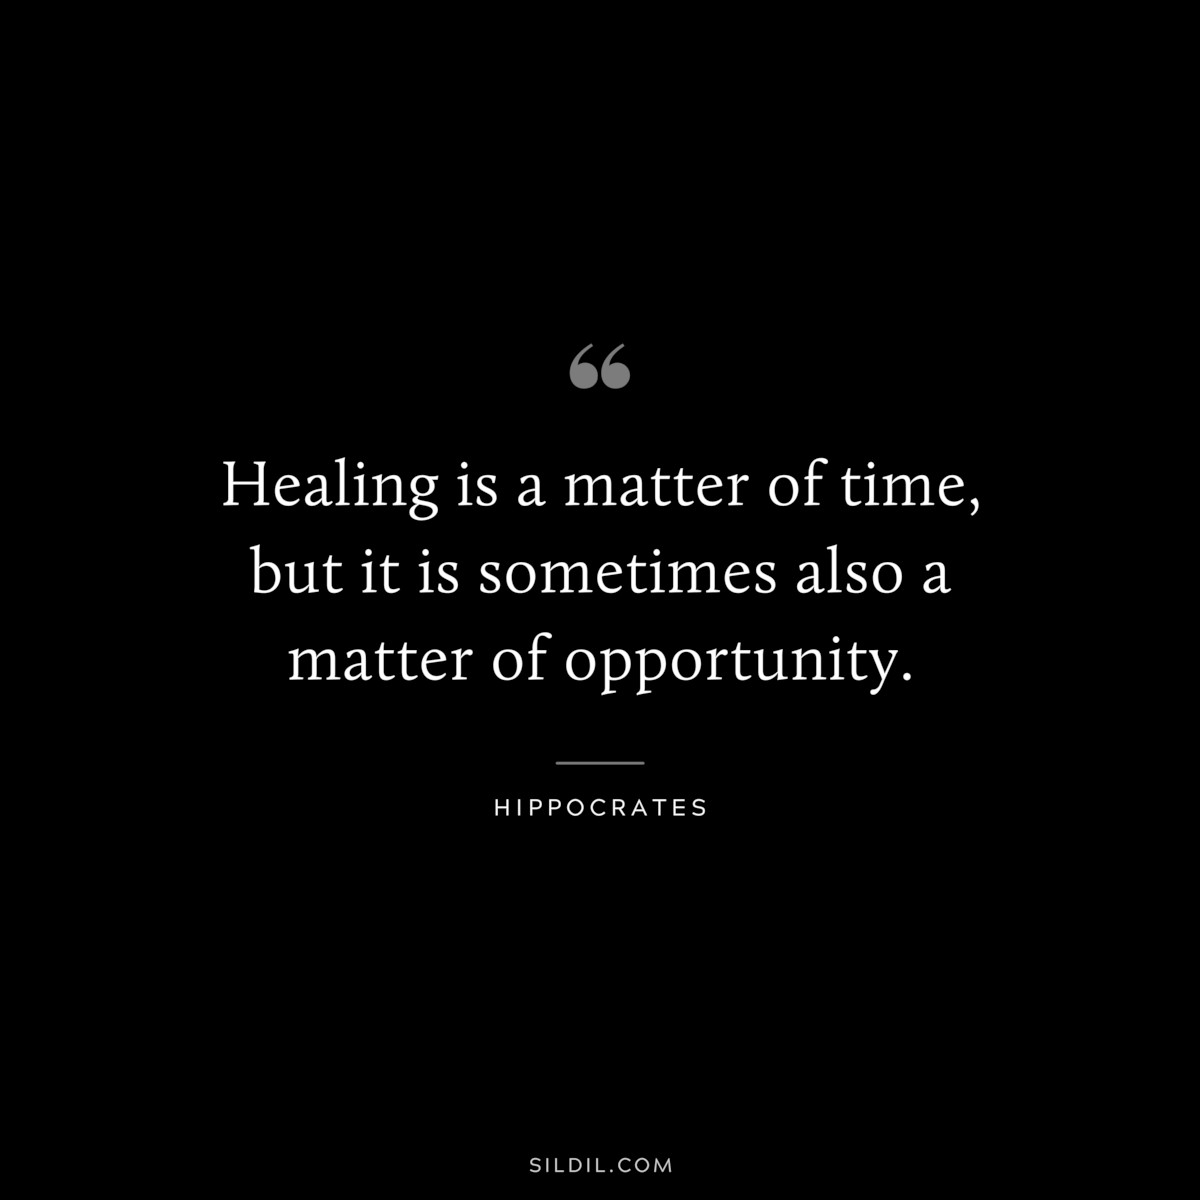 Healing is a matter of time, but it is sometimes also a matter of opportunity. ― Hippocrates